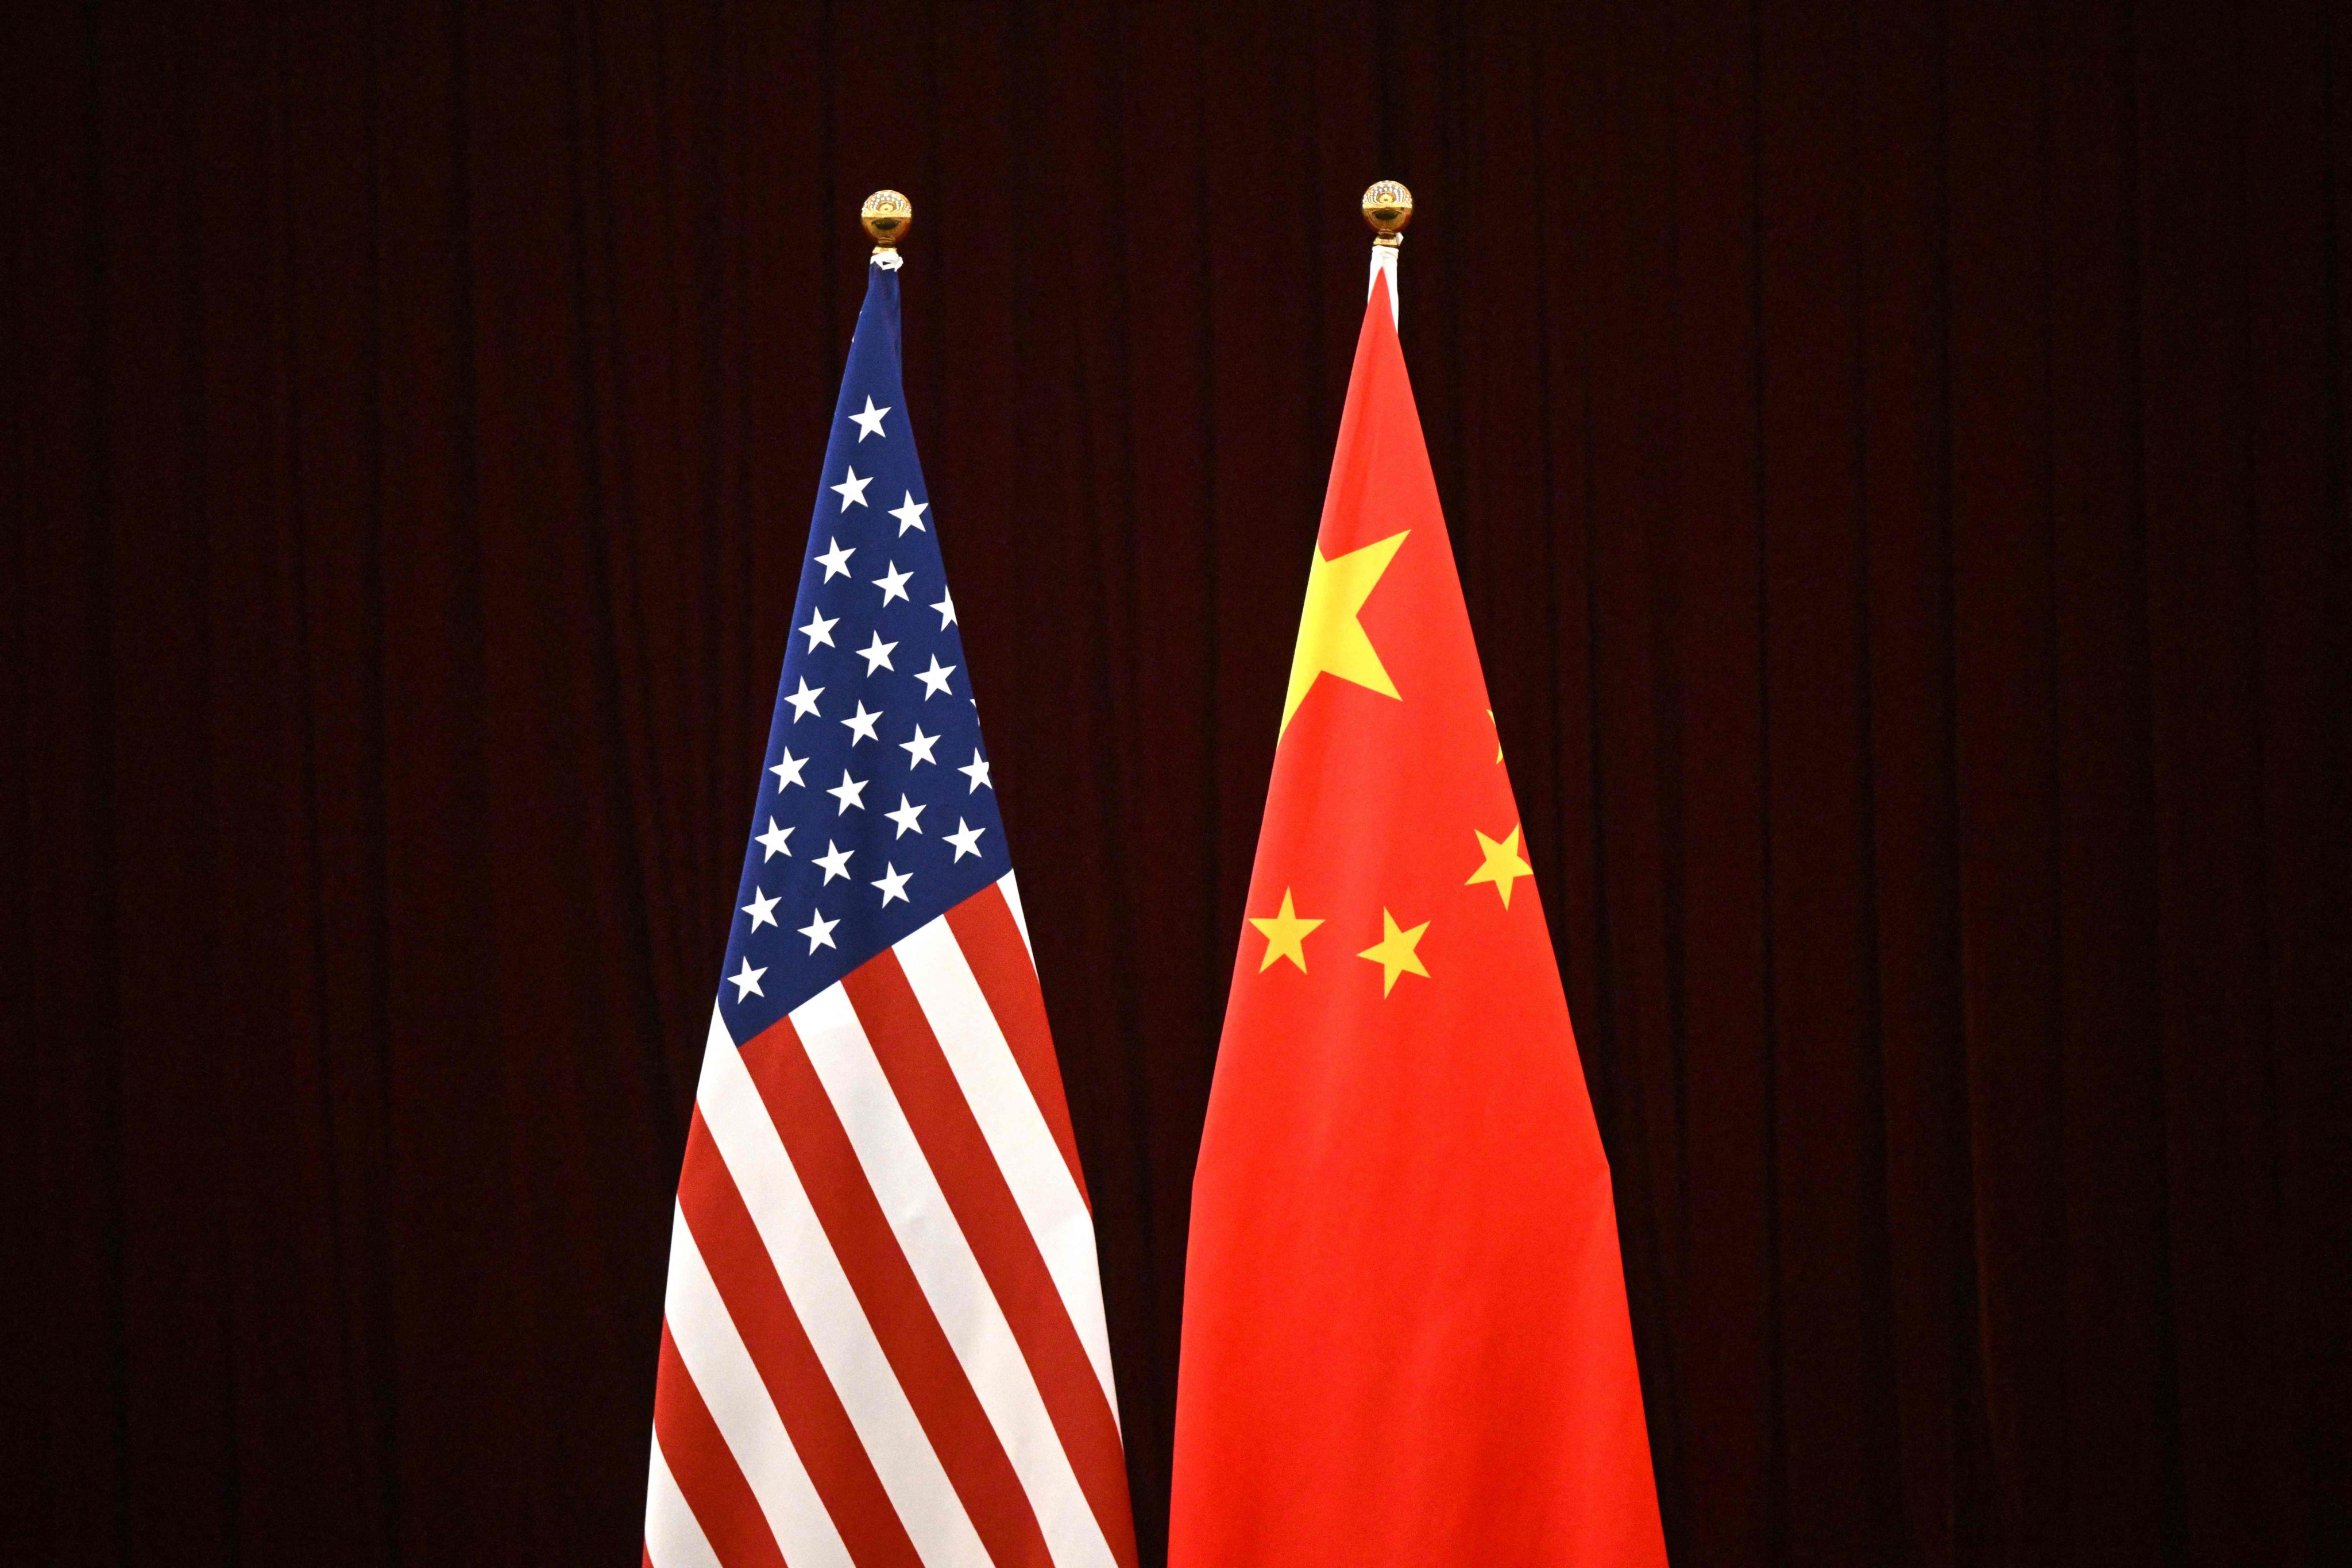 The flags of China and the US. The White House said it is forcing a Chinese-linked company to sell property near a US air base in Wyoming. Photo: AFP